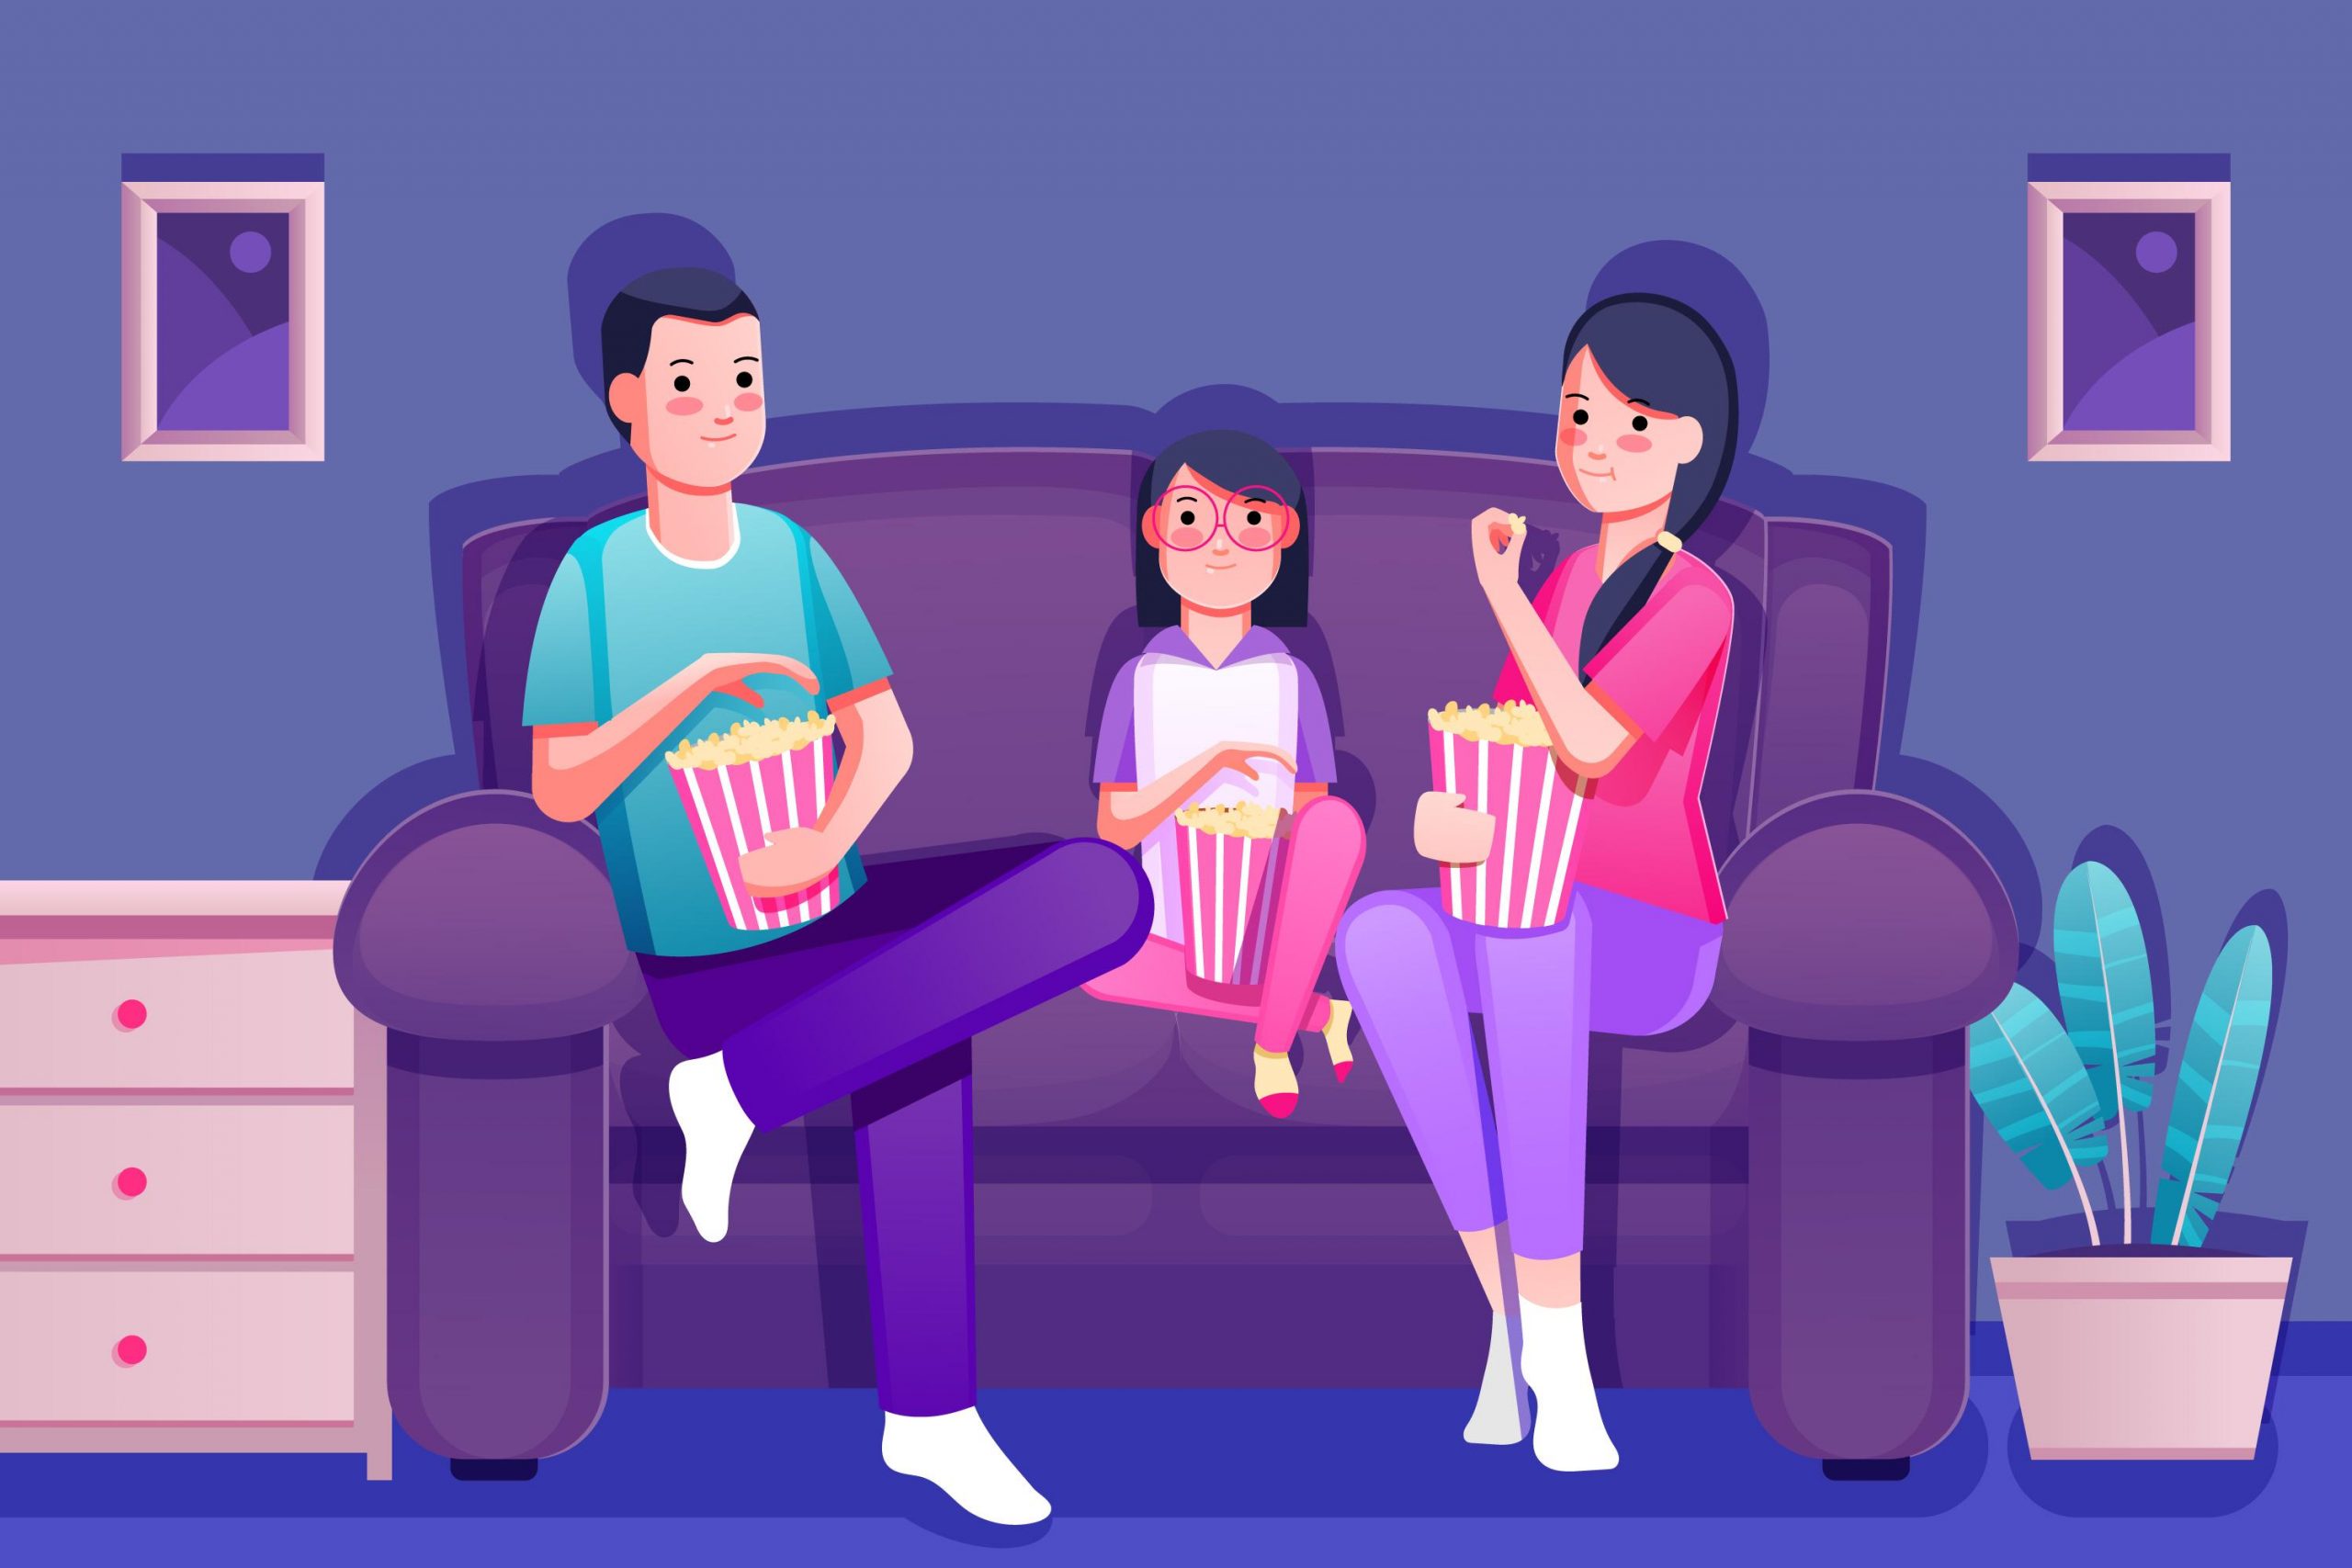 Child-Friendly Movies: A Guide to Entertainment Without Violence, Sexual Content, or Aggression